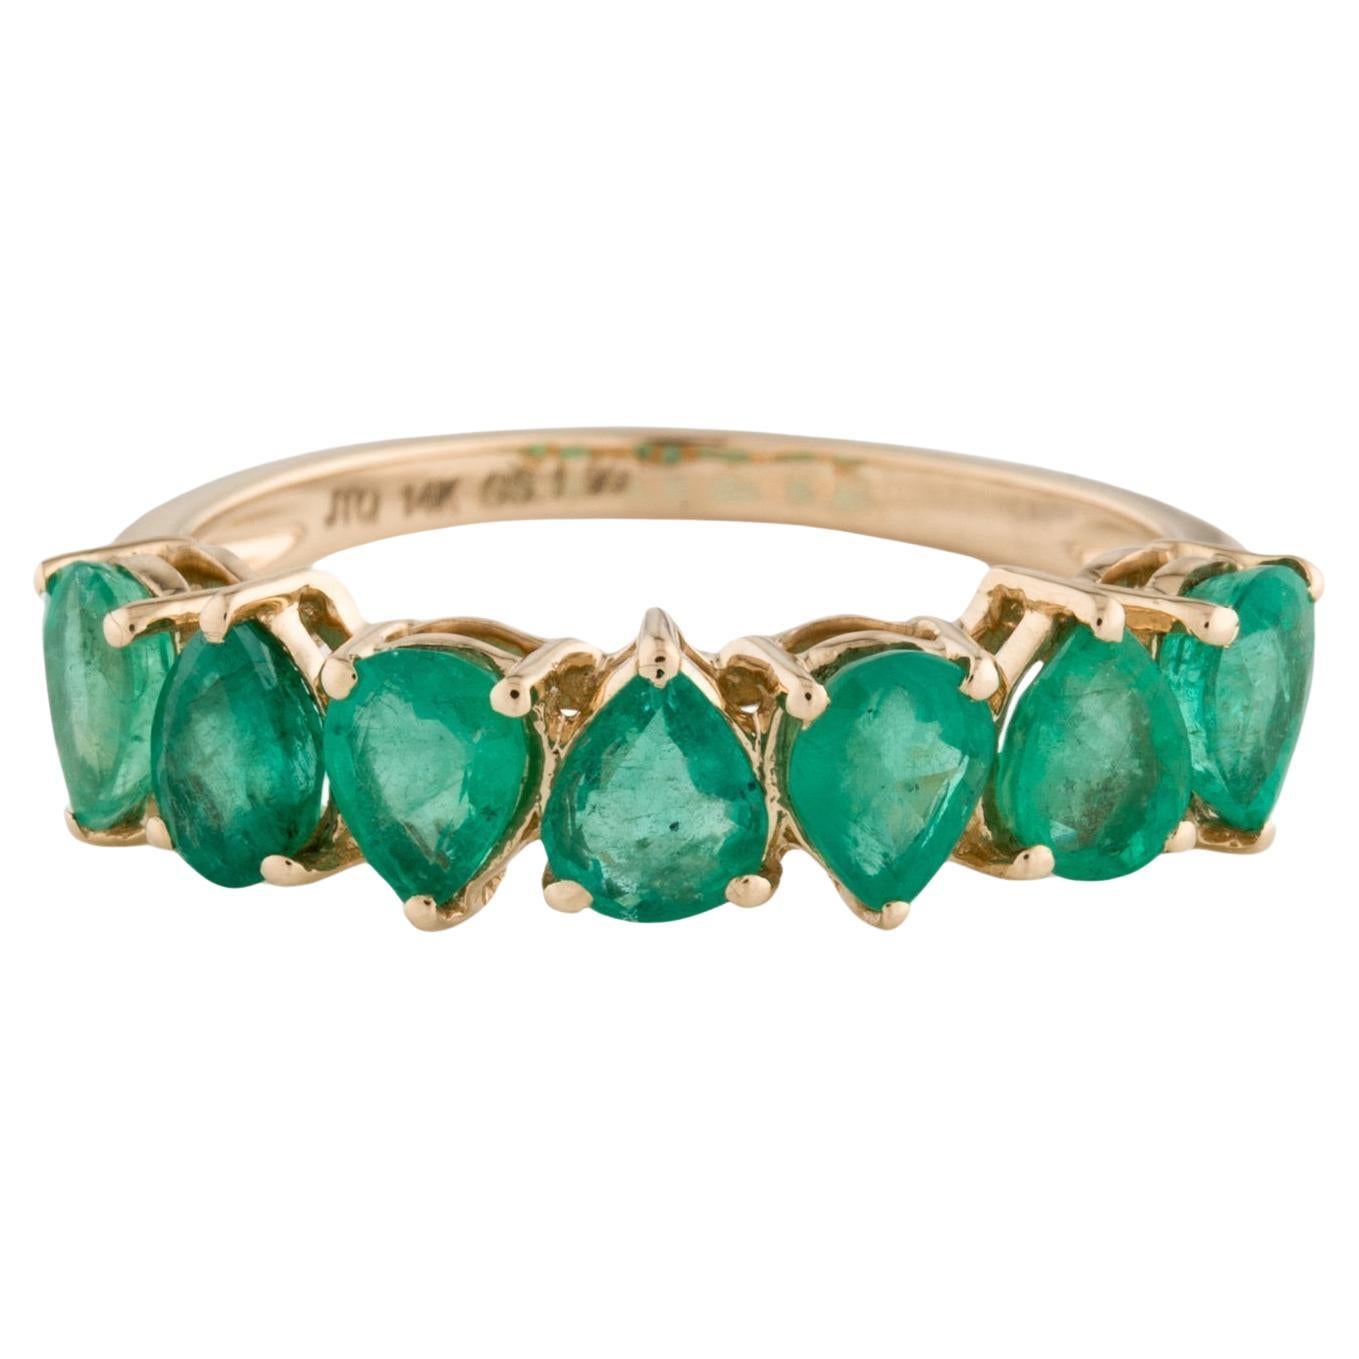 Exquisite 14K Gold 1.68ctw Emerald Band Ring - Size 7.75 - Fine Gemstone Jewelry